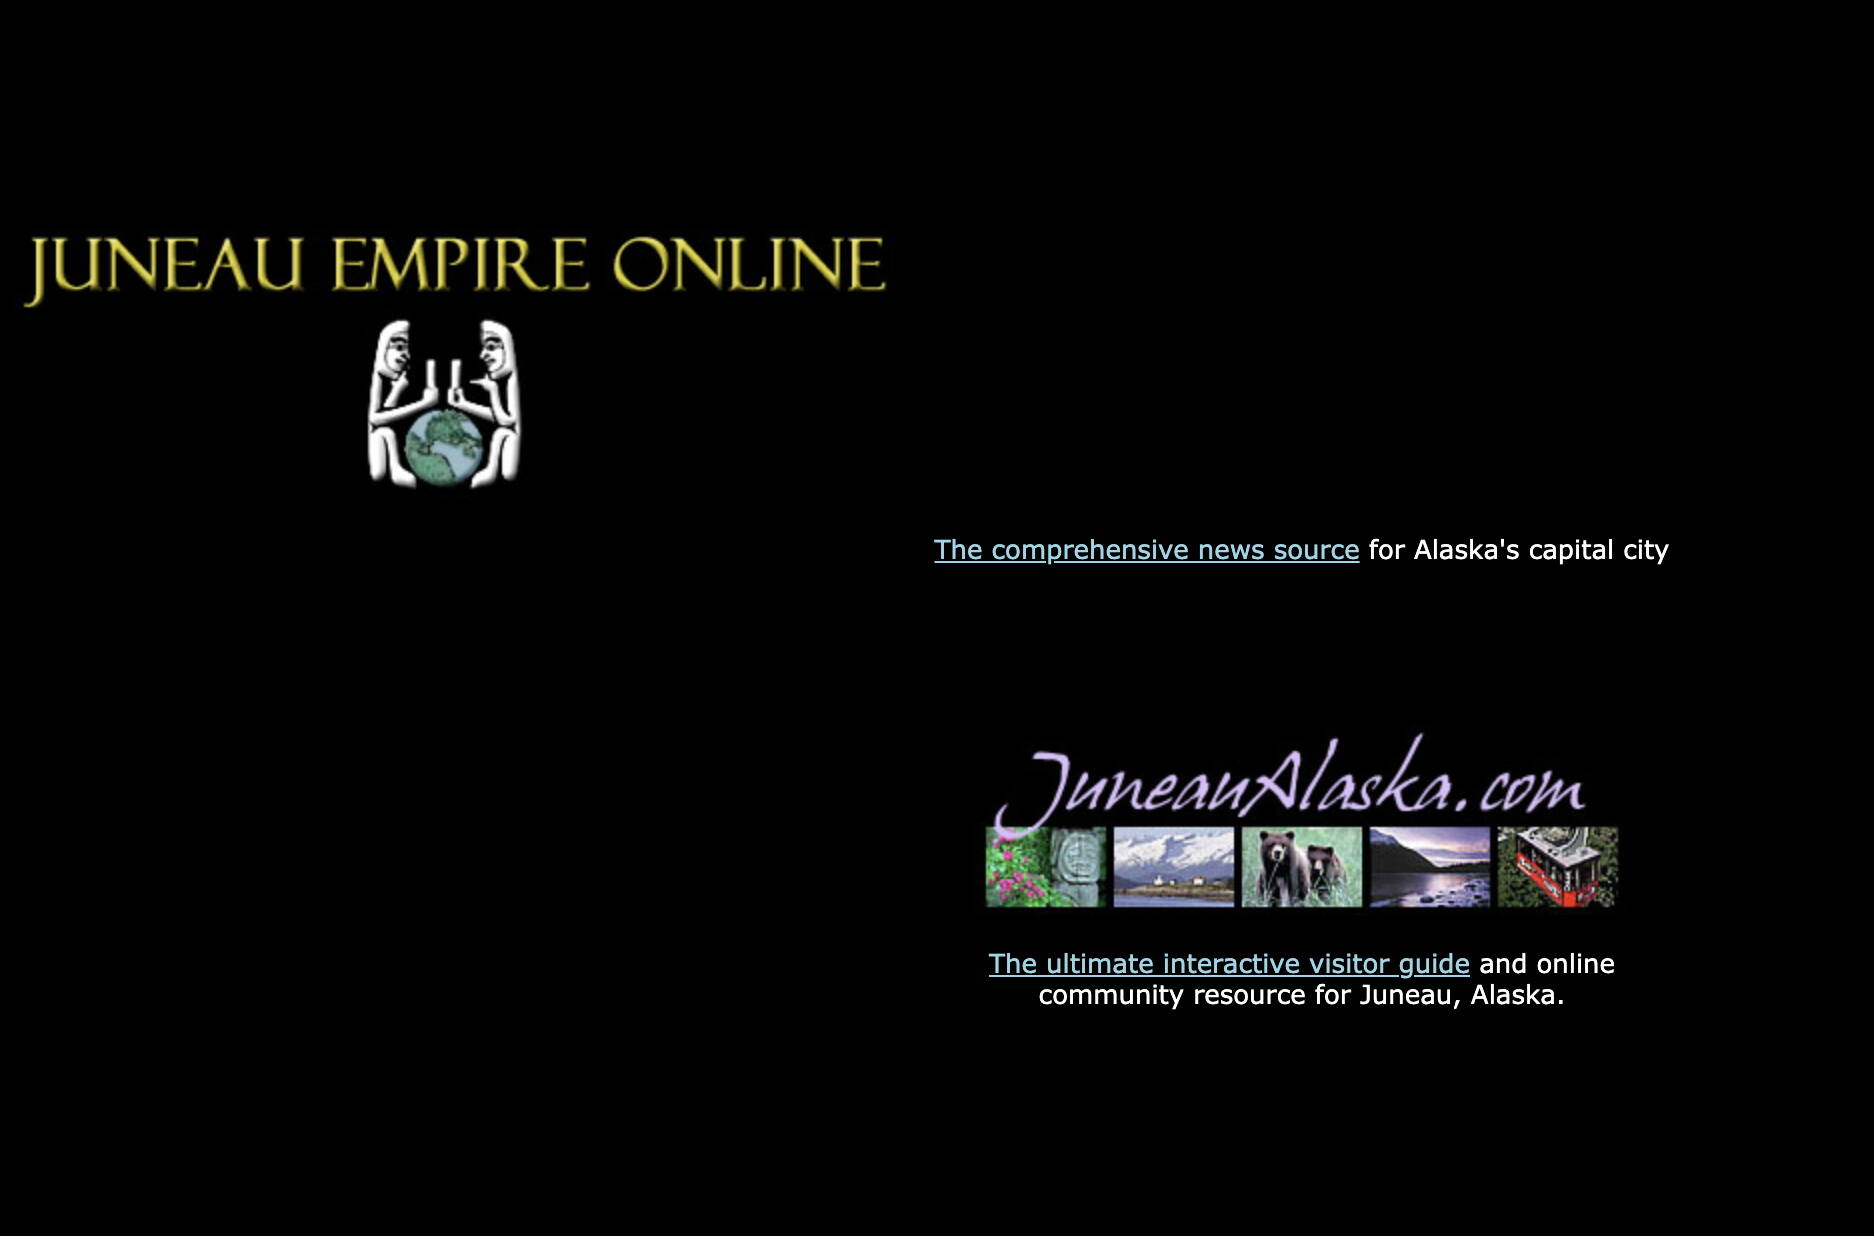 A largely empty splash screen greets visitors to juneauempire.com on June 15, 2000, when the newspaper was trying to highlight its new juneaualaska.com website intended as visitor and community guide. Users needed to click a link to reveal the “real” news homepage. (Screenshot of juneauempire.com from the Internet Archive)